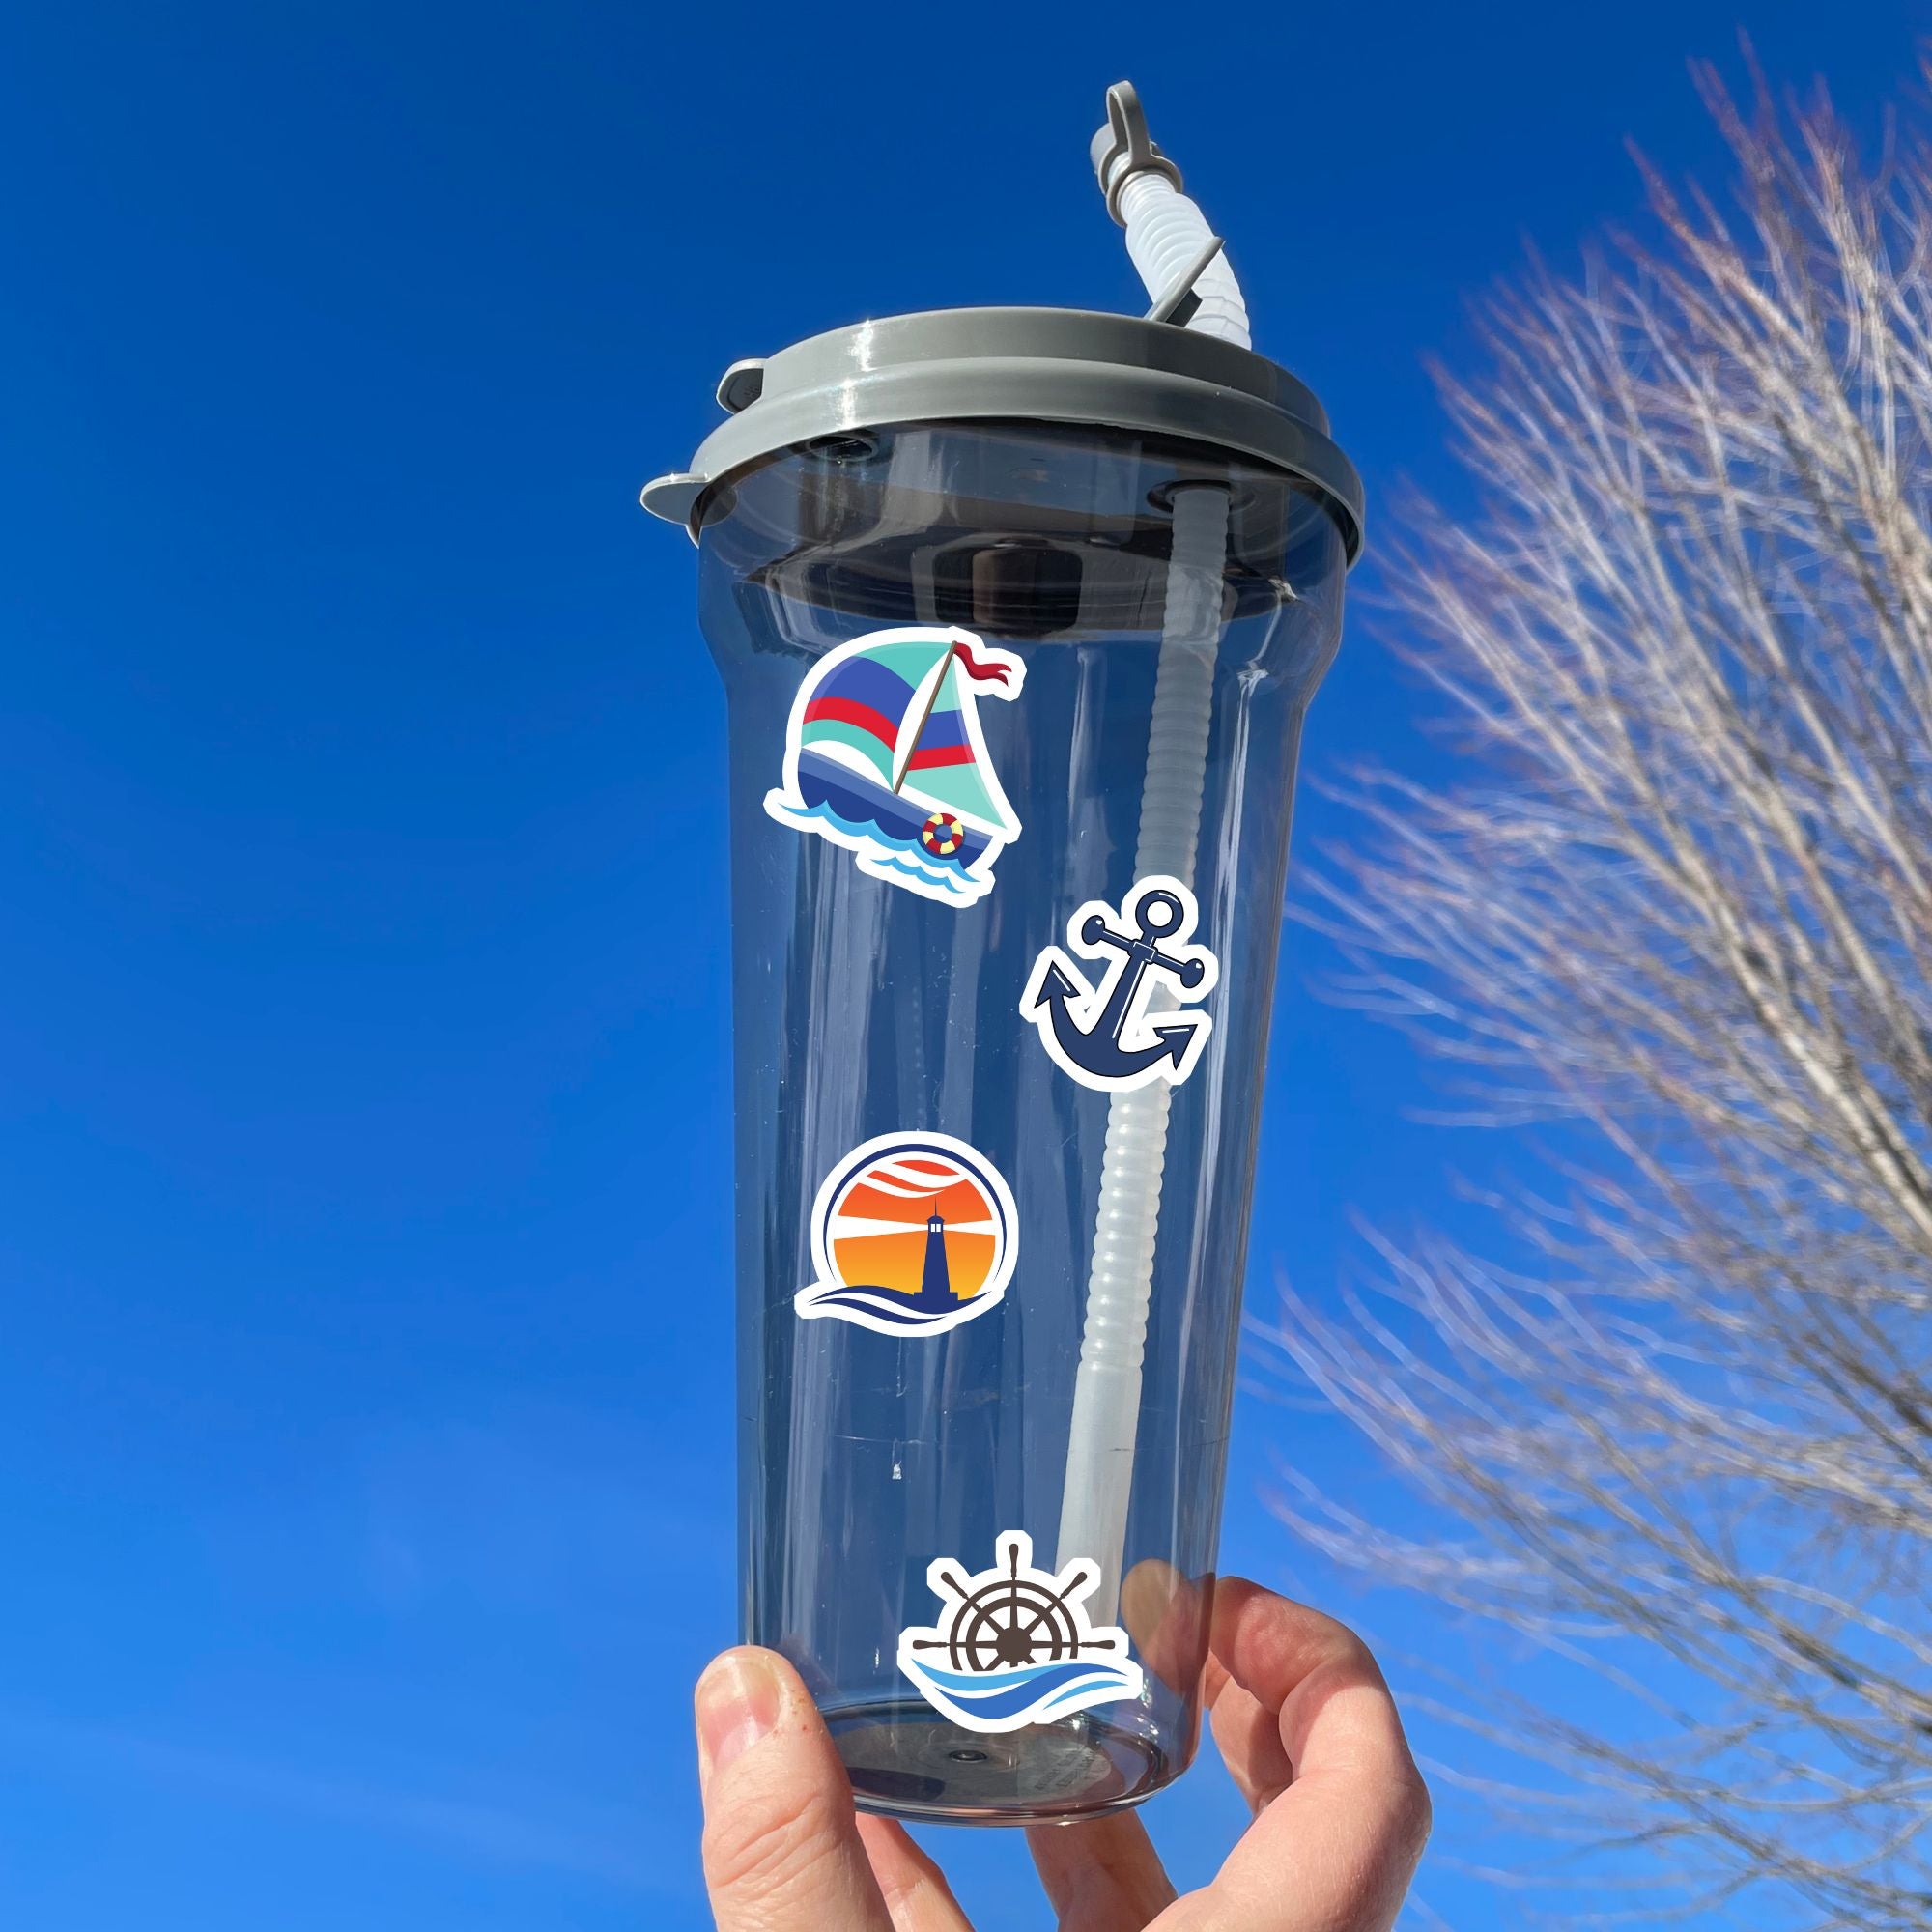 Permission to come aboard and sail away? This sticker sheet has twelve different sailing designs perfect for any captain or first mate! This image shows a water bottle with 4 stickers applied: Sailboat sticker, anchor sticker, lighthouse with a sunrise or sunset, and ships wheel and waves.